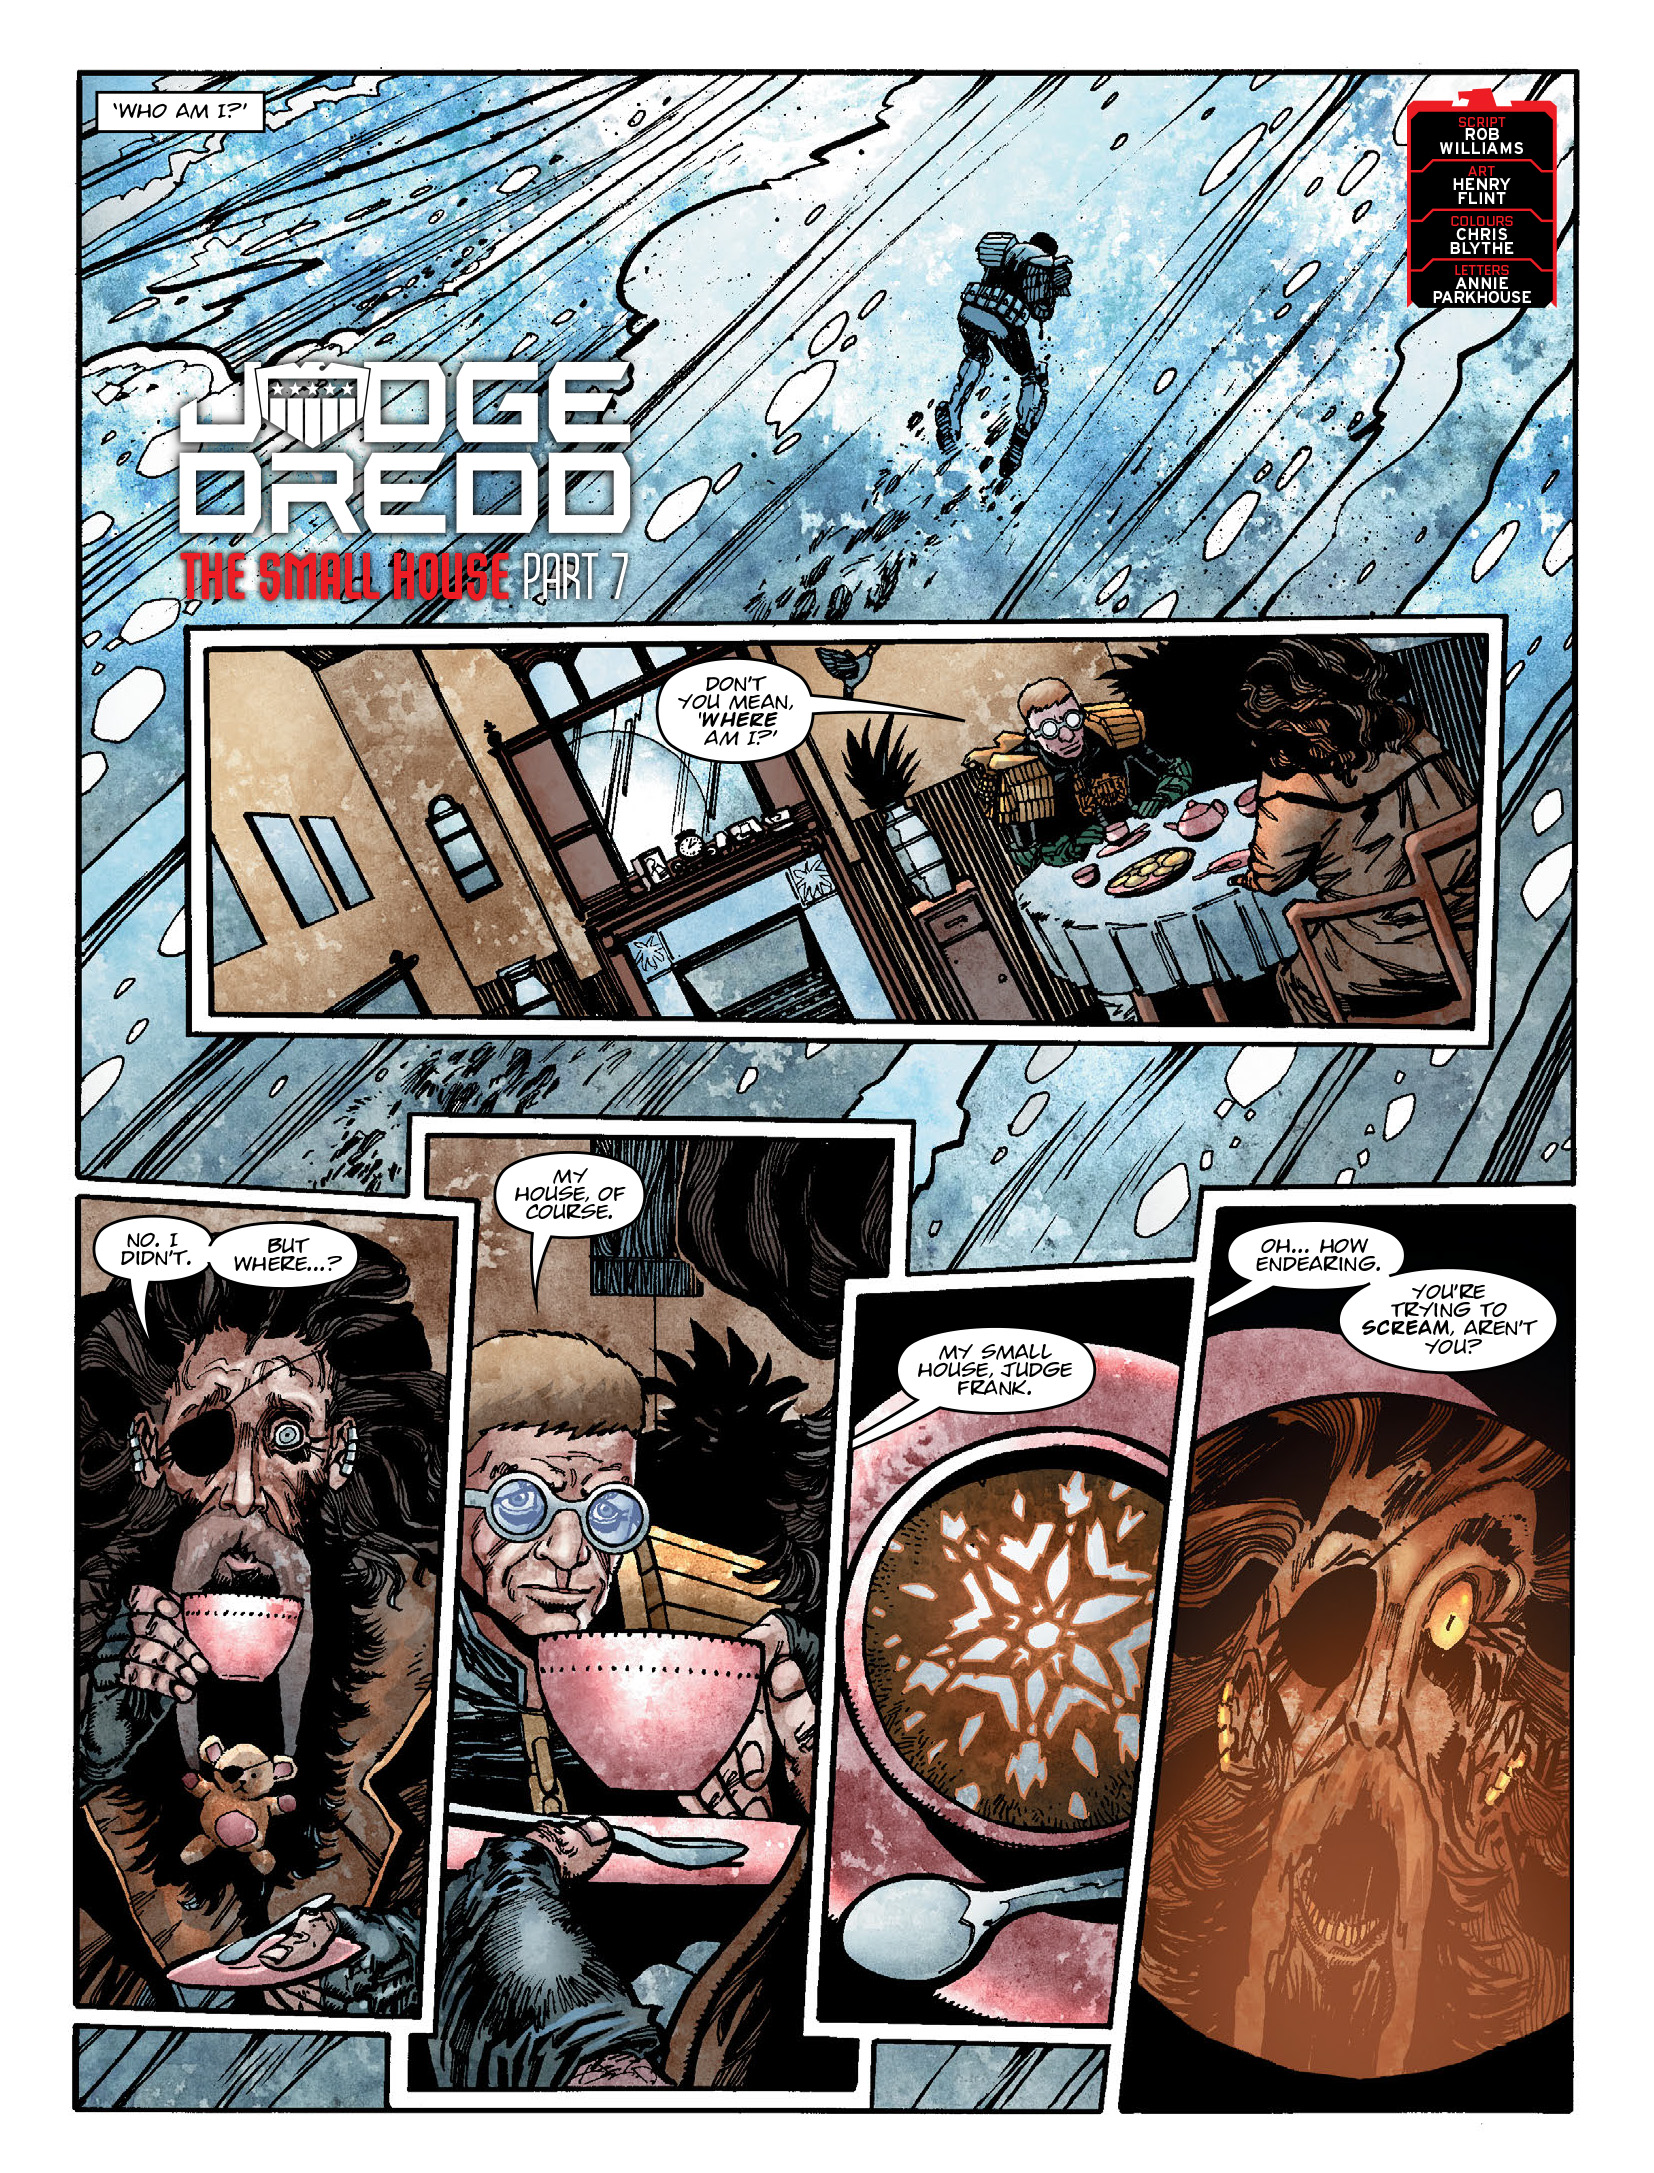 2000 AD: Chapter 2106 - Page 3